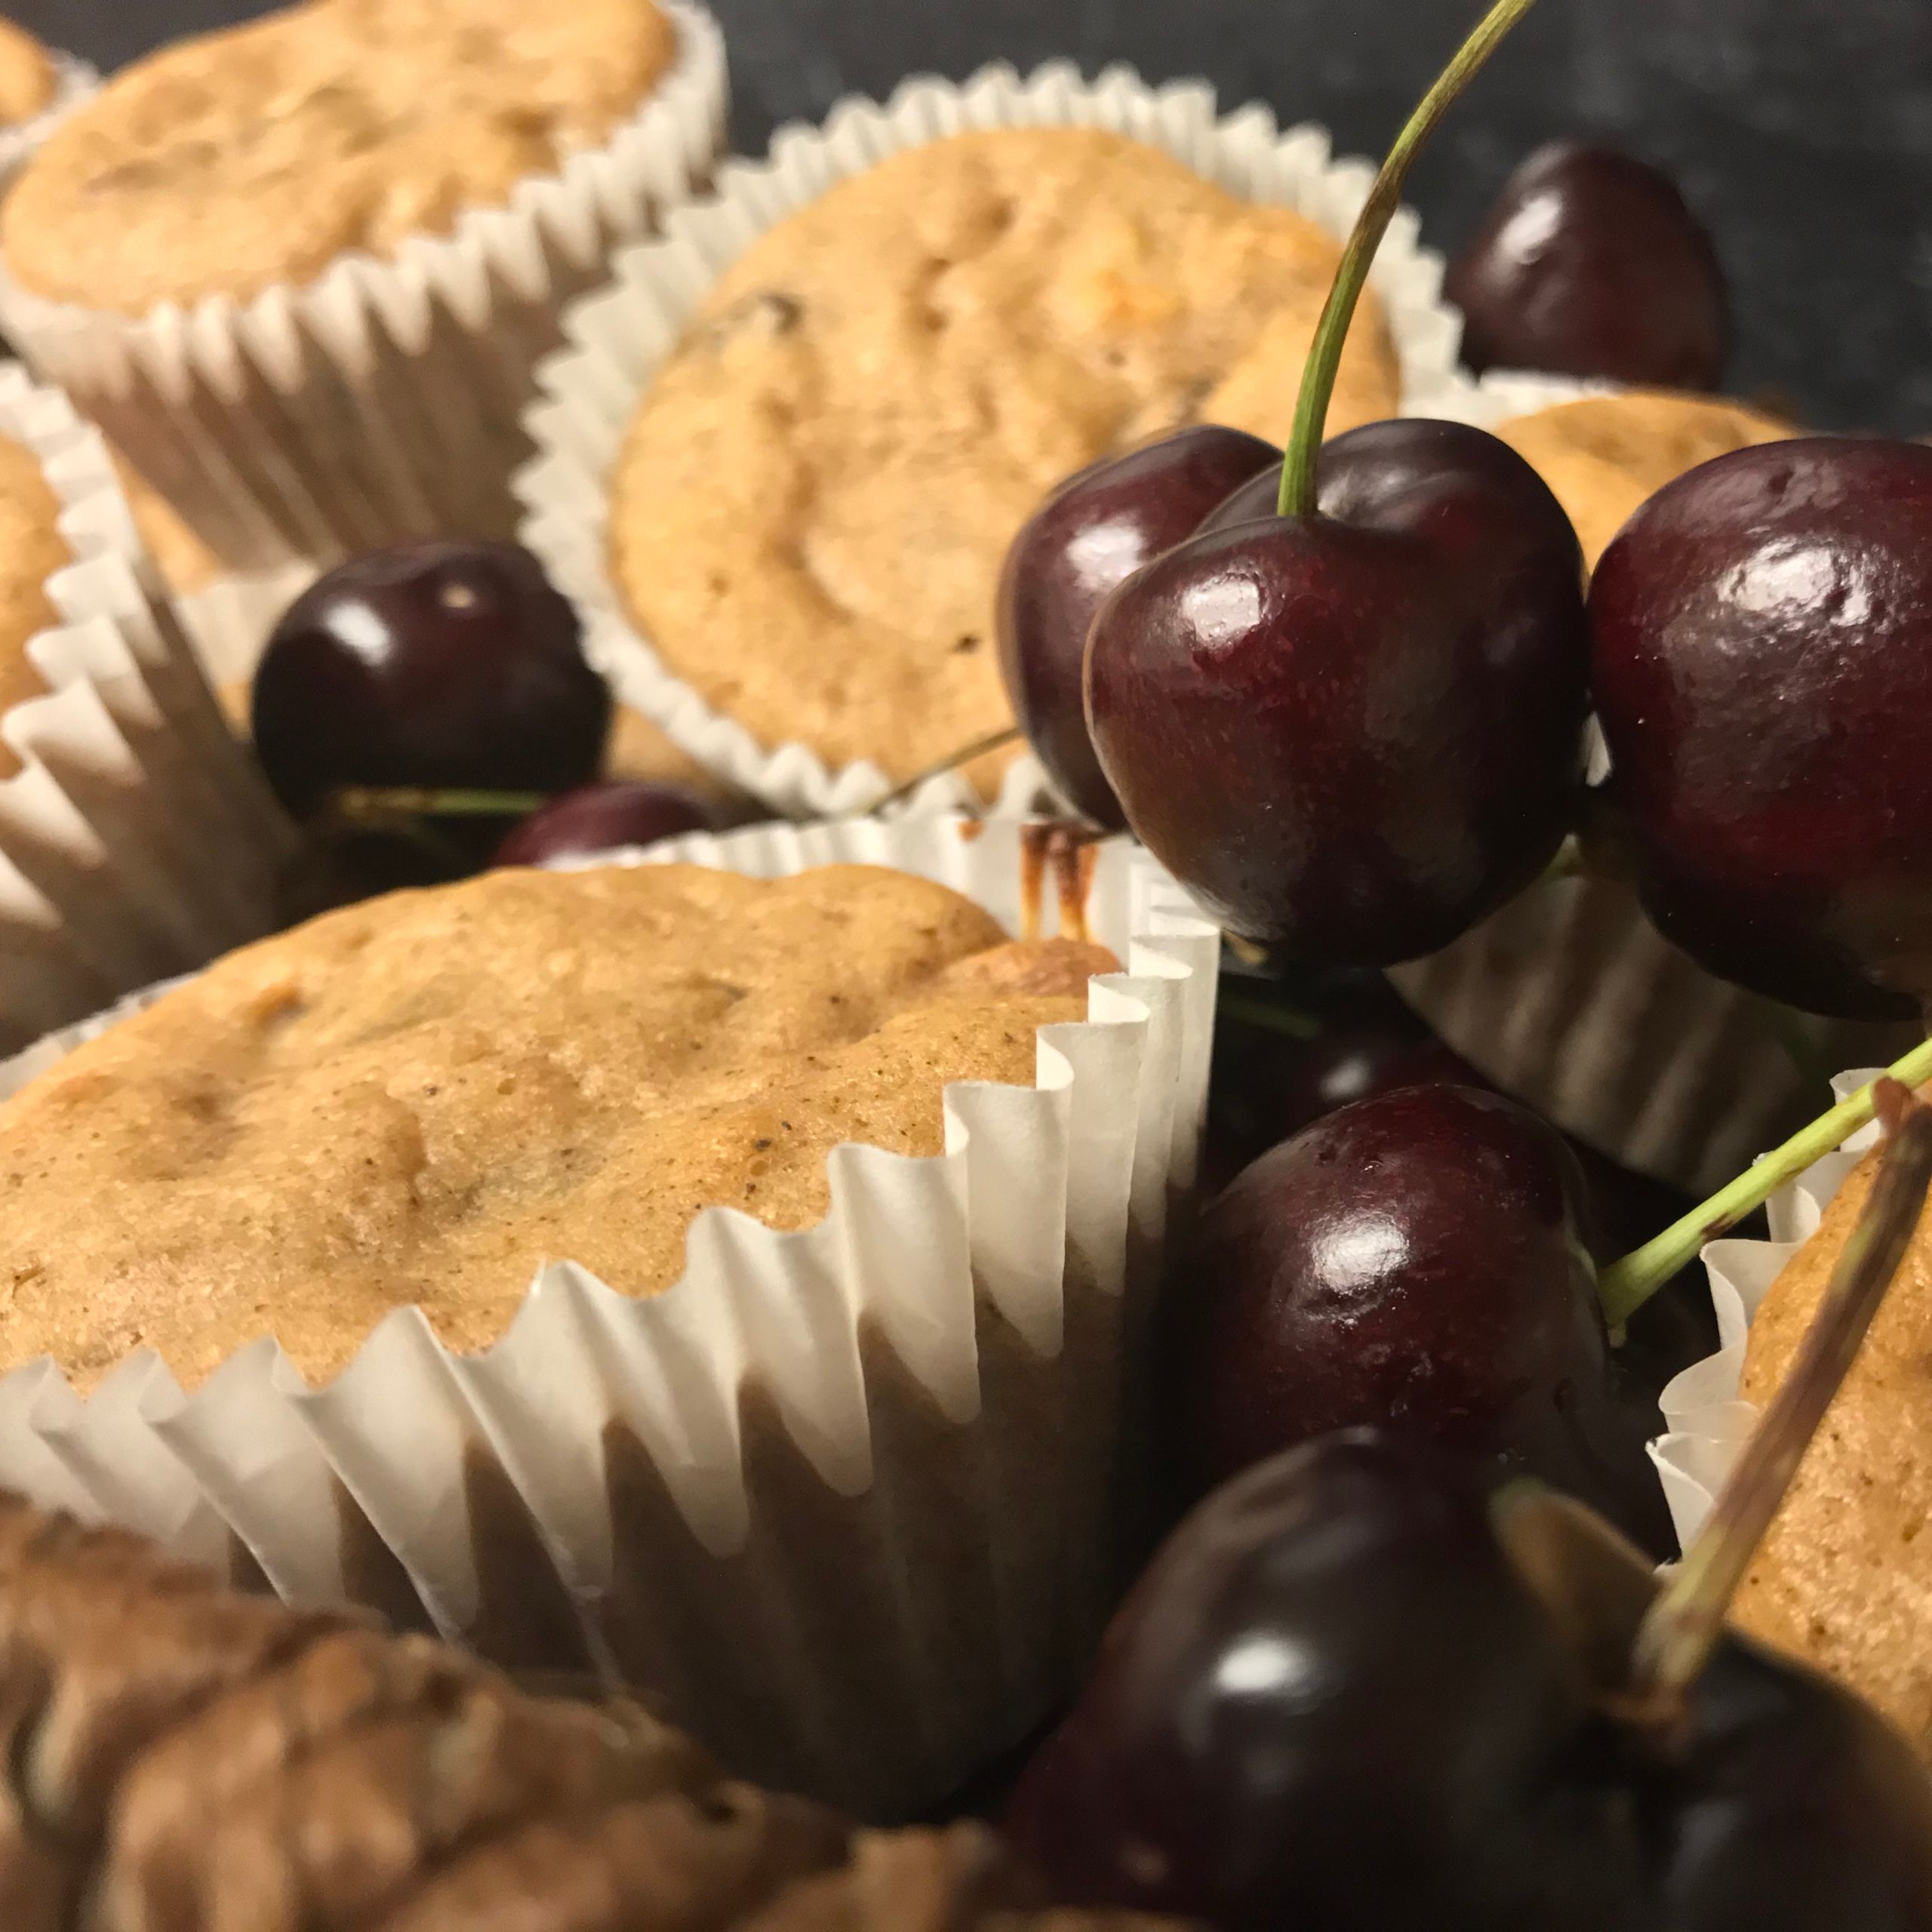 Muffins and cherries in a basket